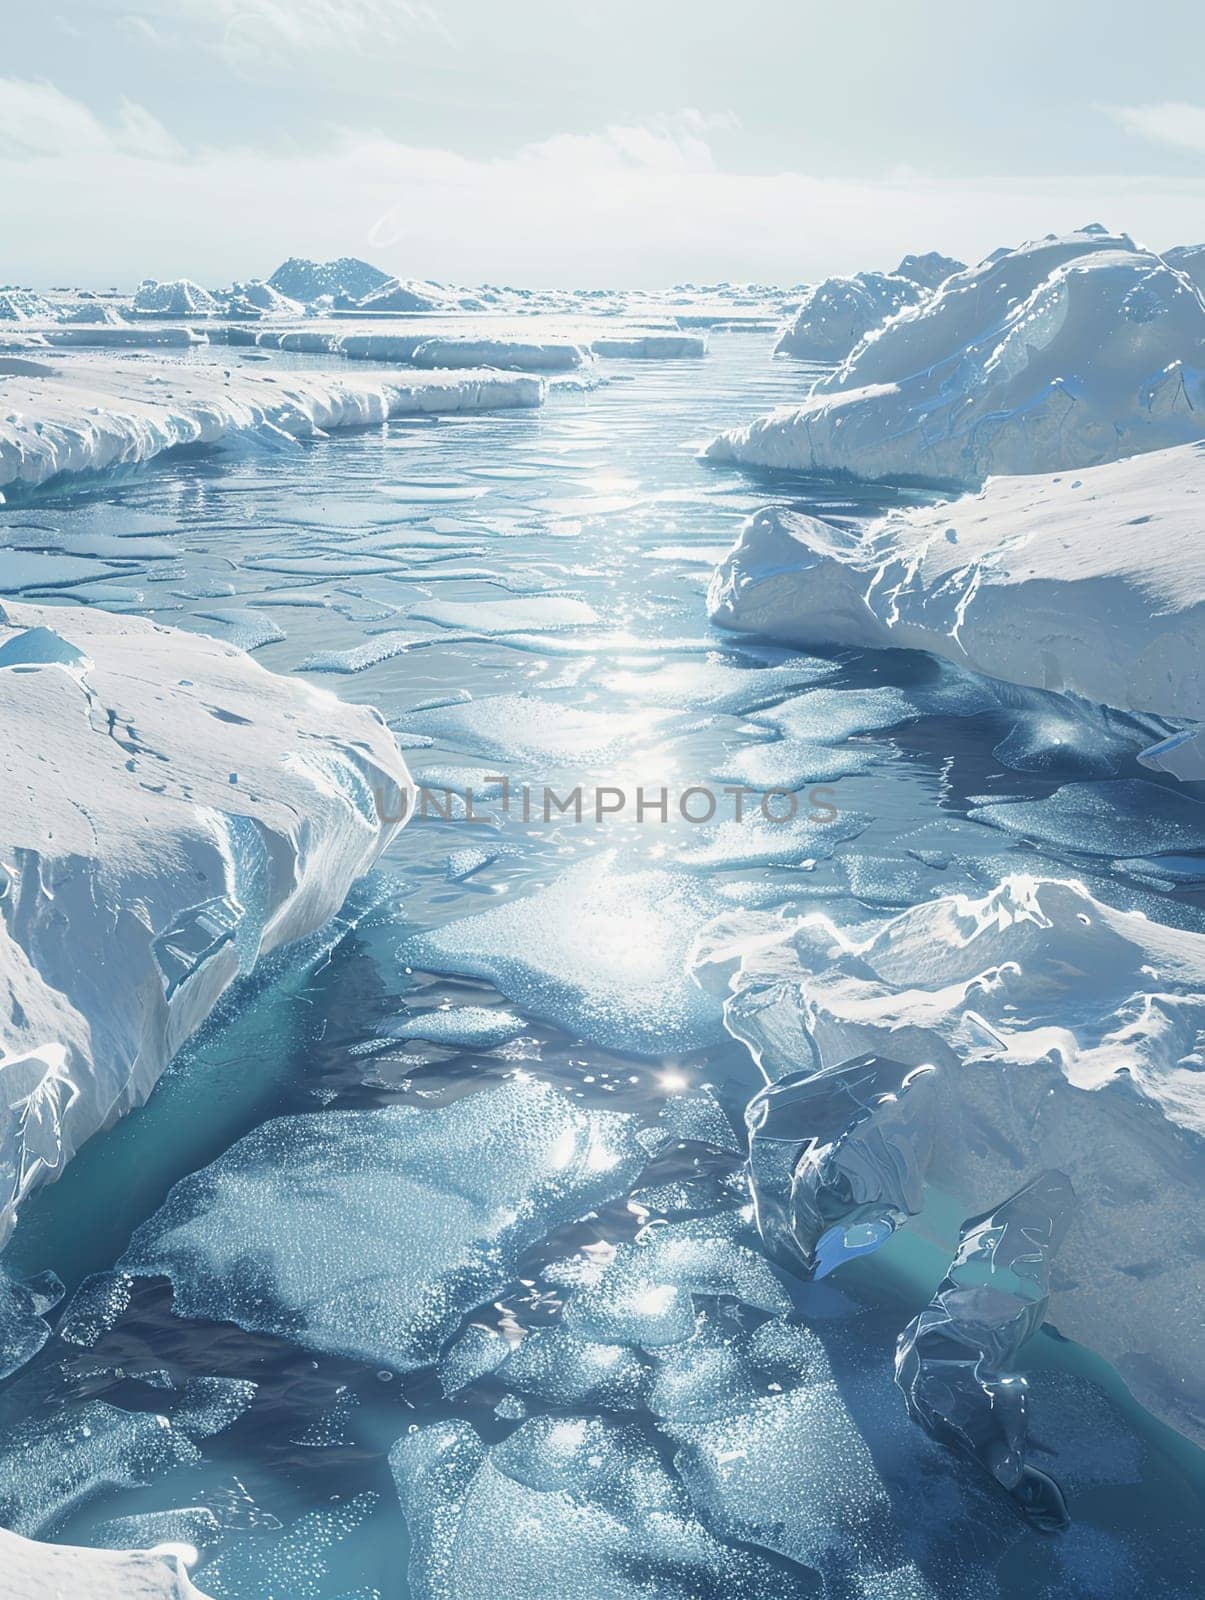 A vast expanse of water surrounded by ice, showcasing the cold and icy environment of the Arctic.